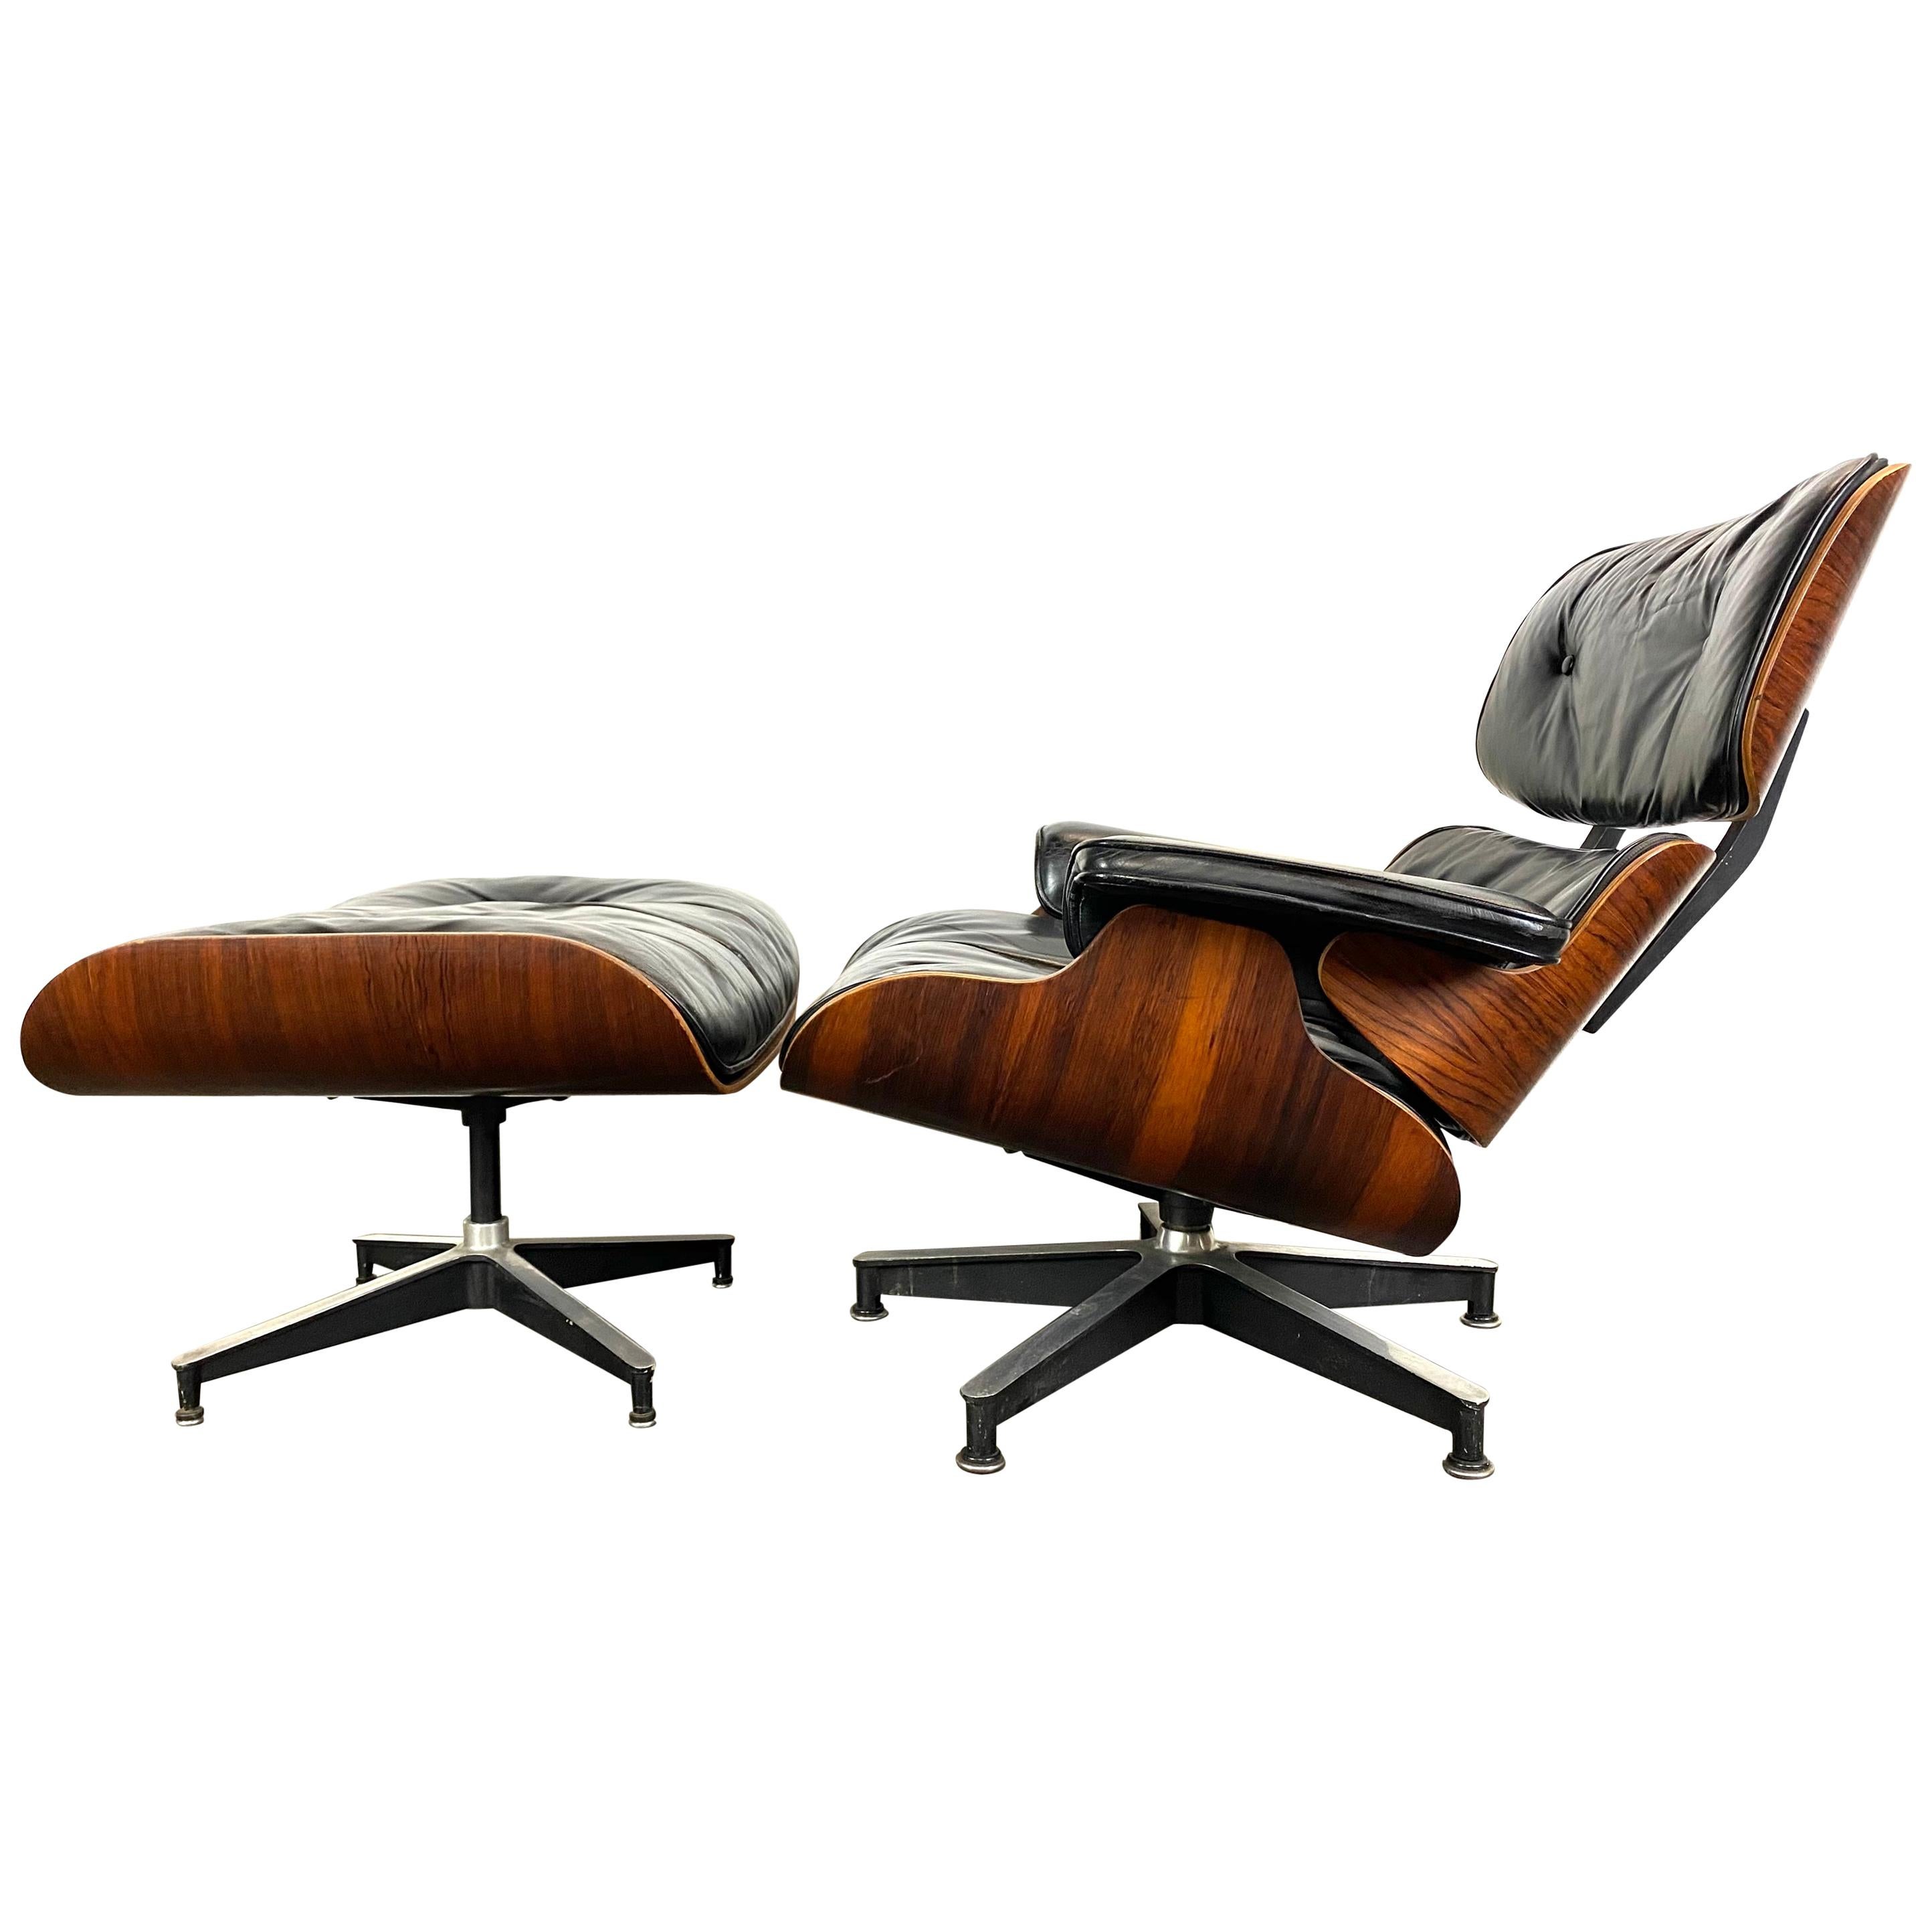 Stunning 1960s Herman Miller Eames Lounge Chair and Ottoman